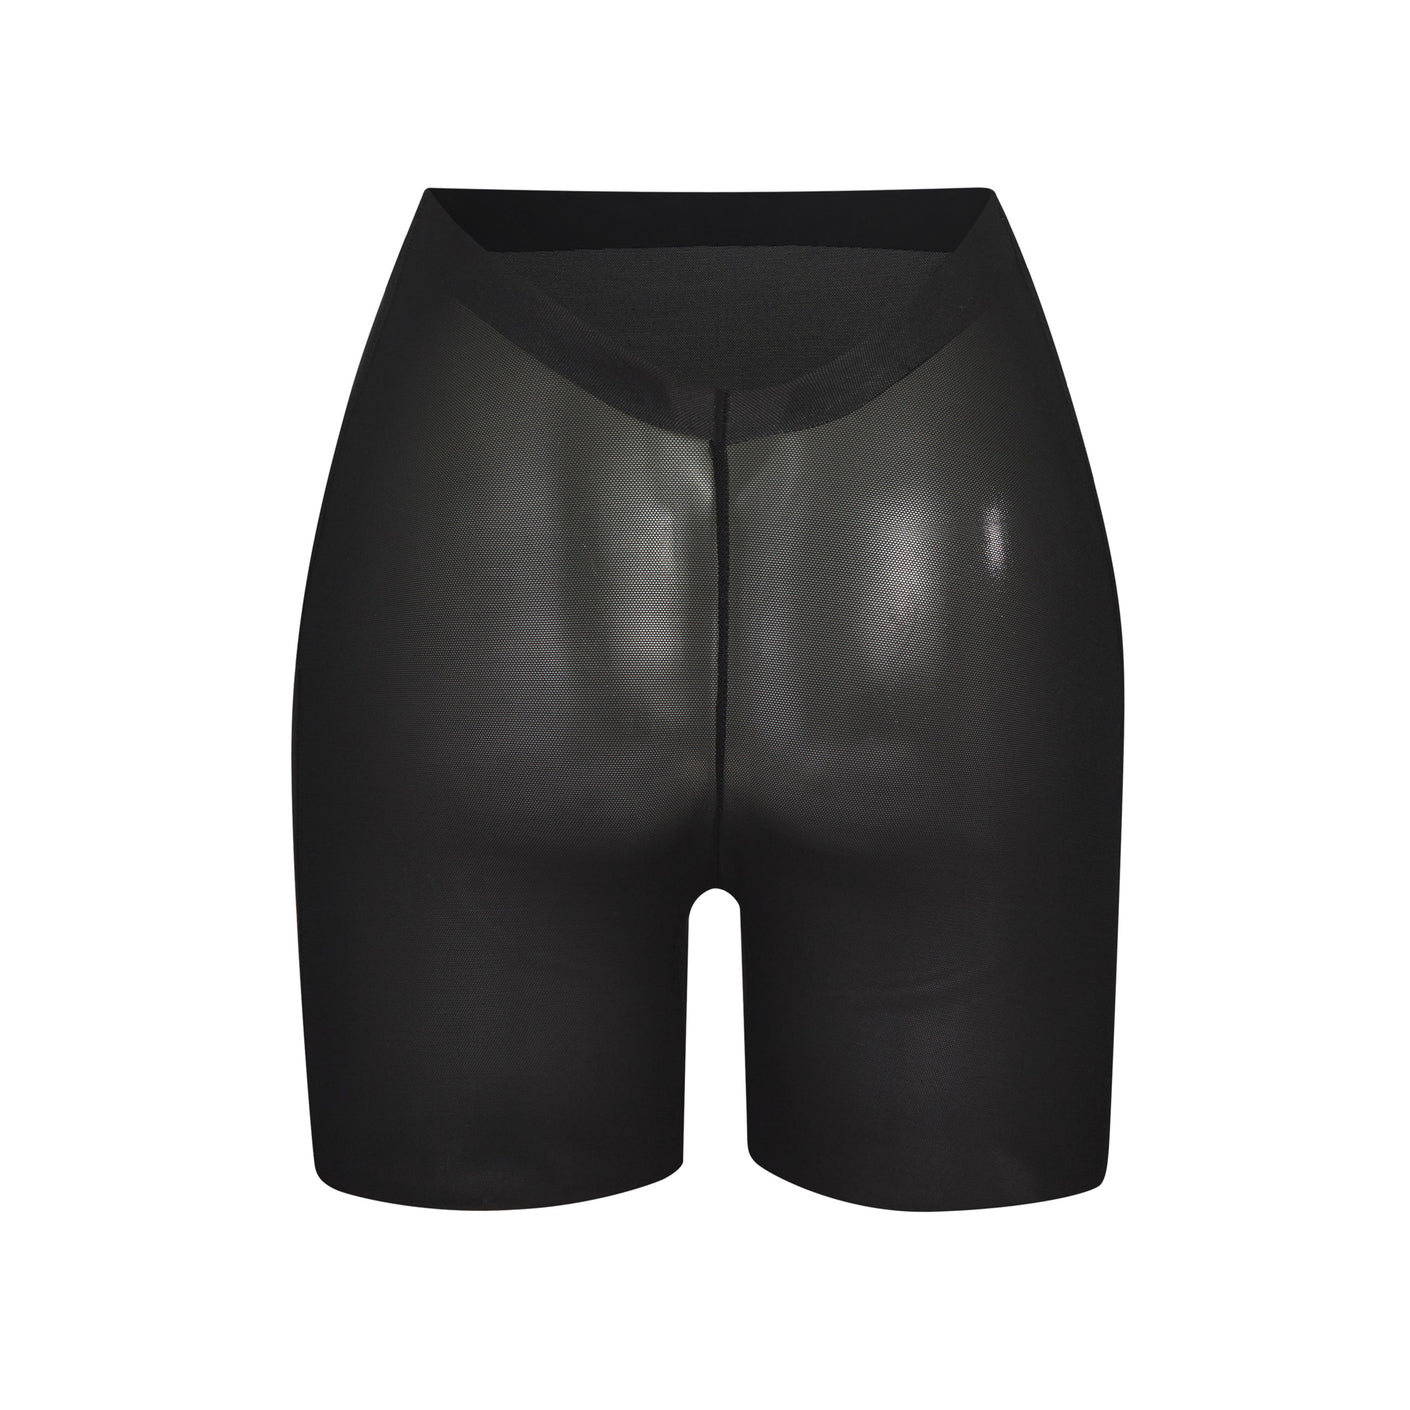 Barely There Shapewear Low Back Shorts